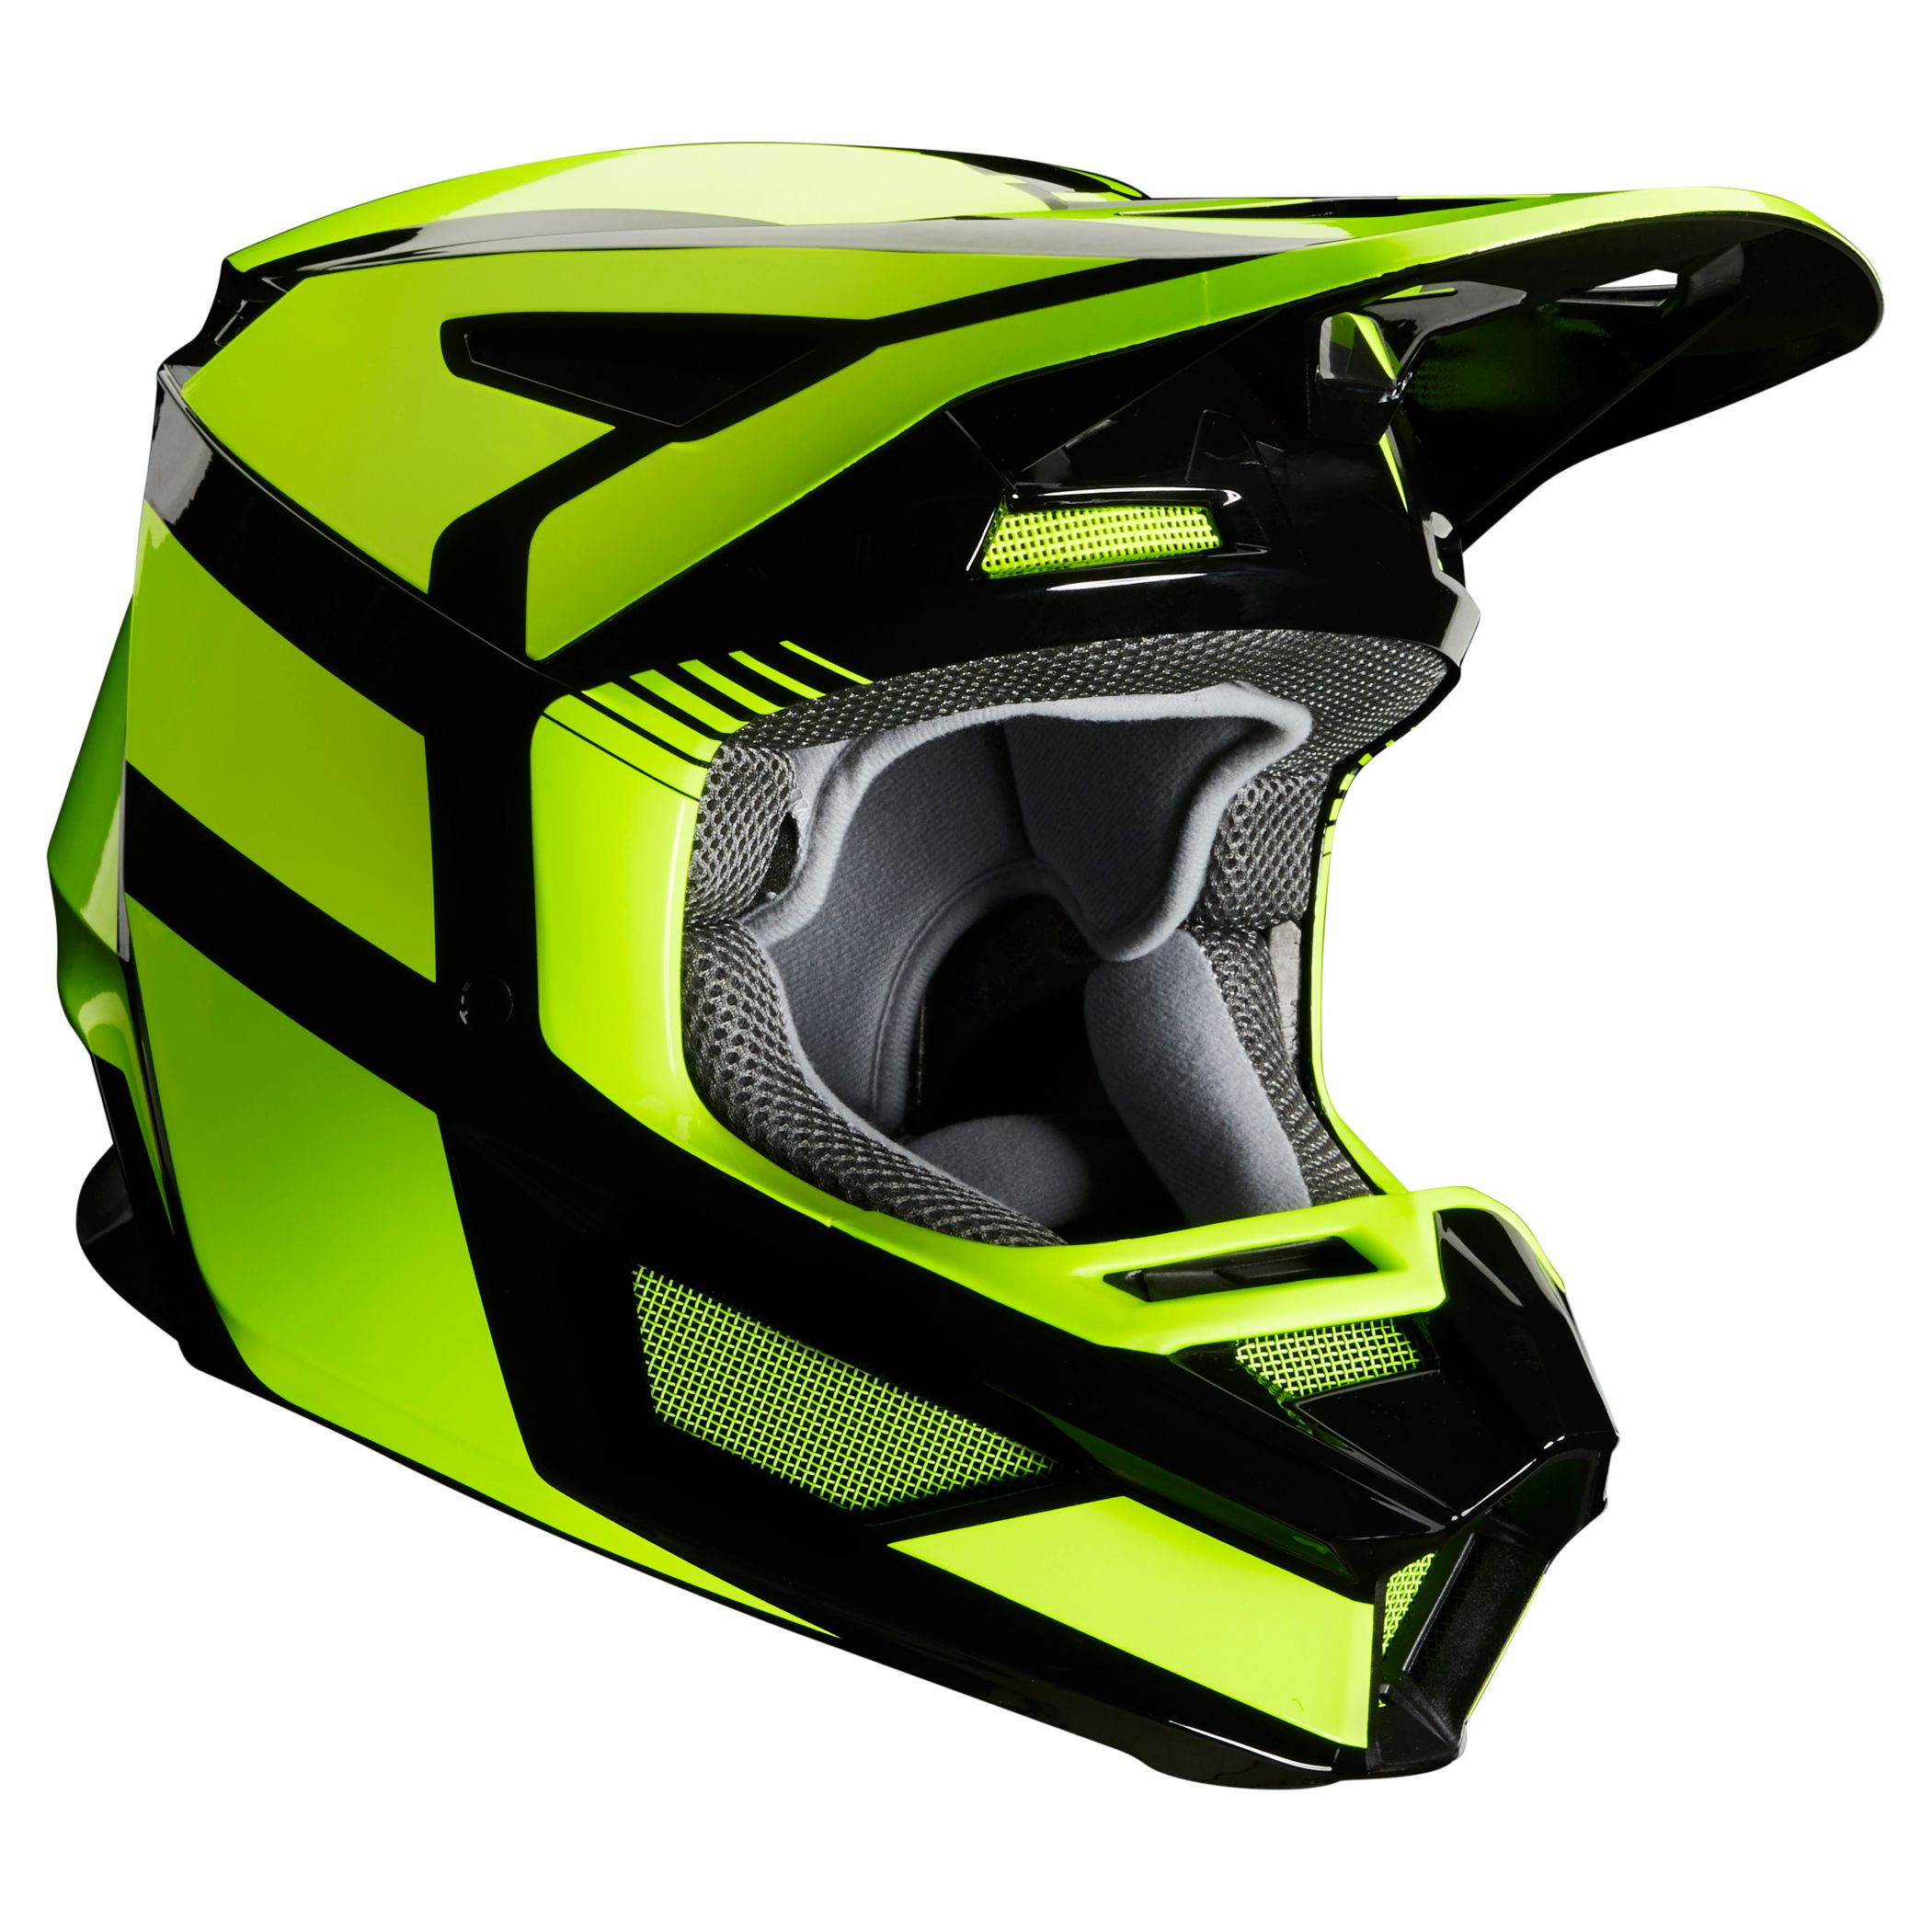 Image of Casque cross Fox YOUTH V2 - HAYL - YELLOW FLUO